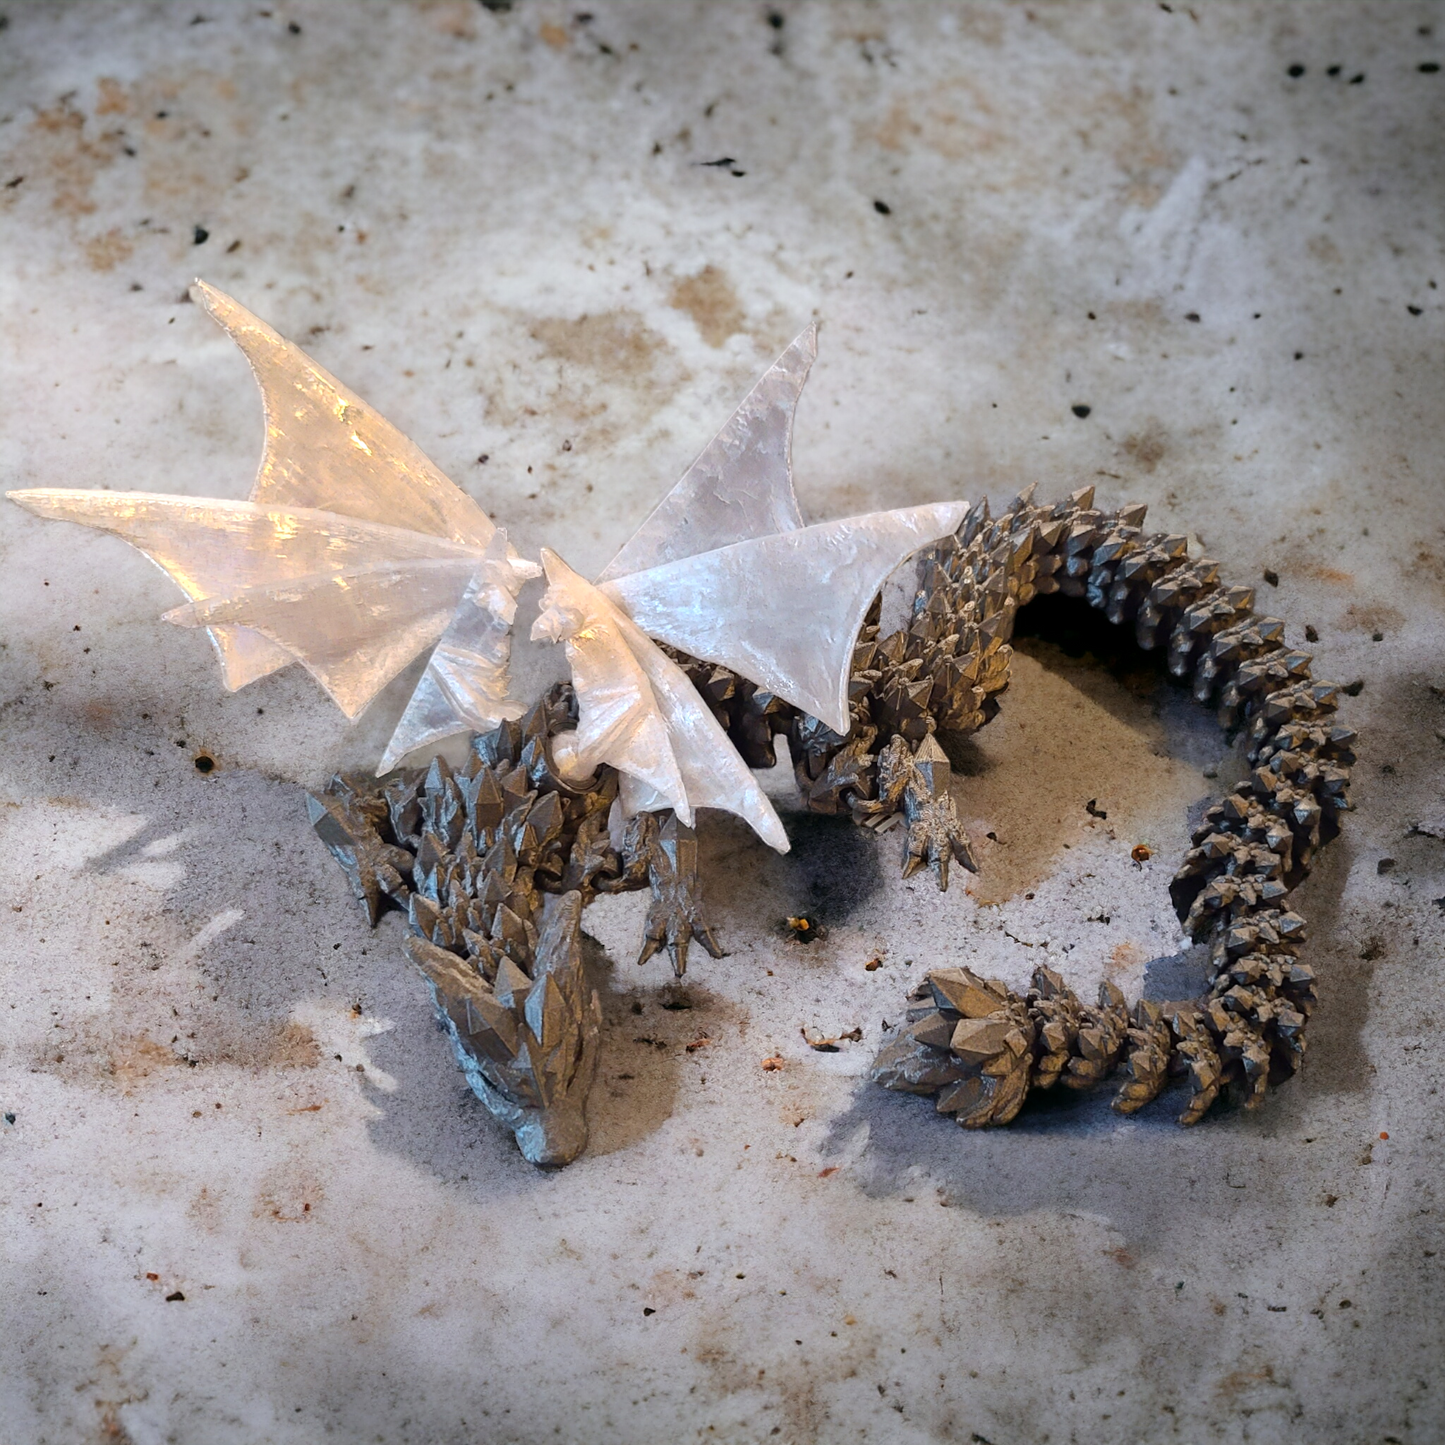 Crystal Wolf dragon, 3d print, gift for him, for a child, Winged Dragon, birthday gift, adult gift, Christmas gift, stocking stuffers